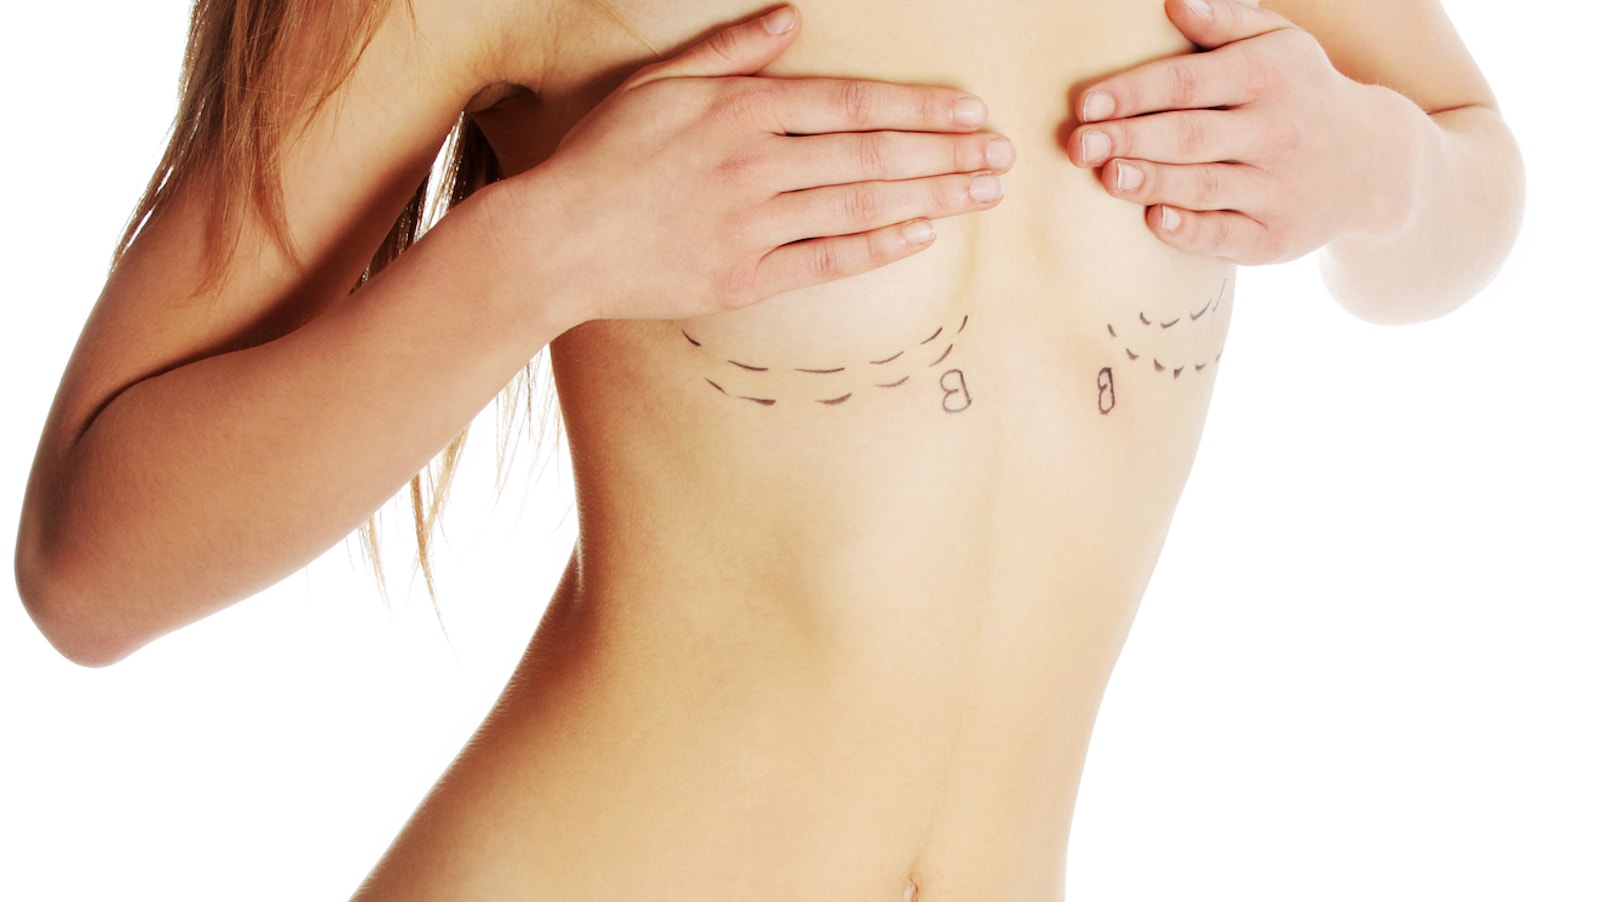 Breast Augmentation in Thin, Athletic Women